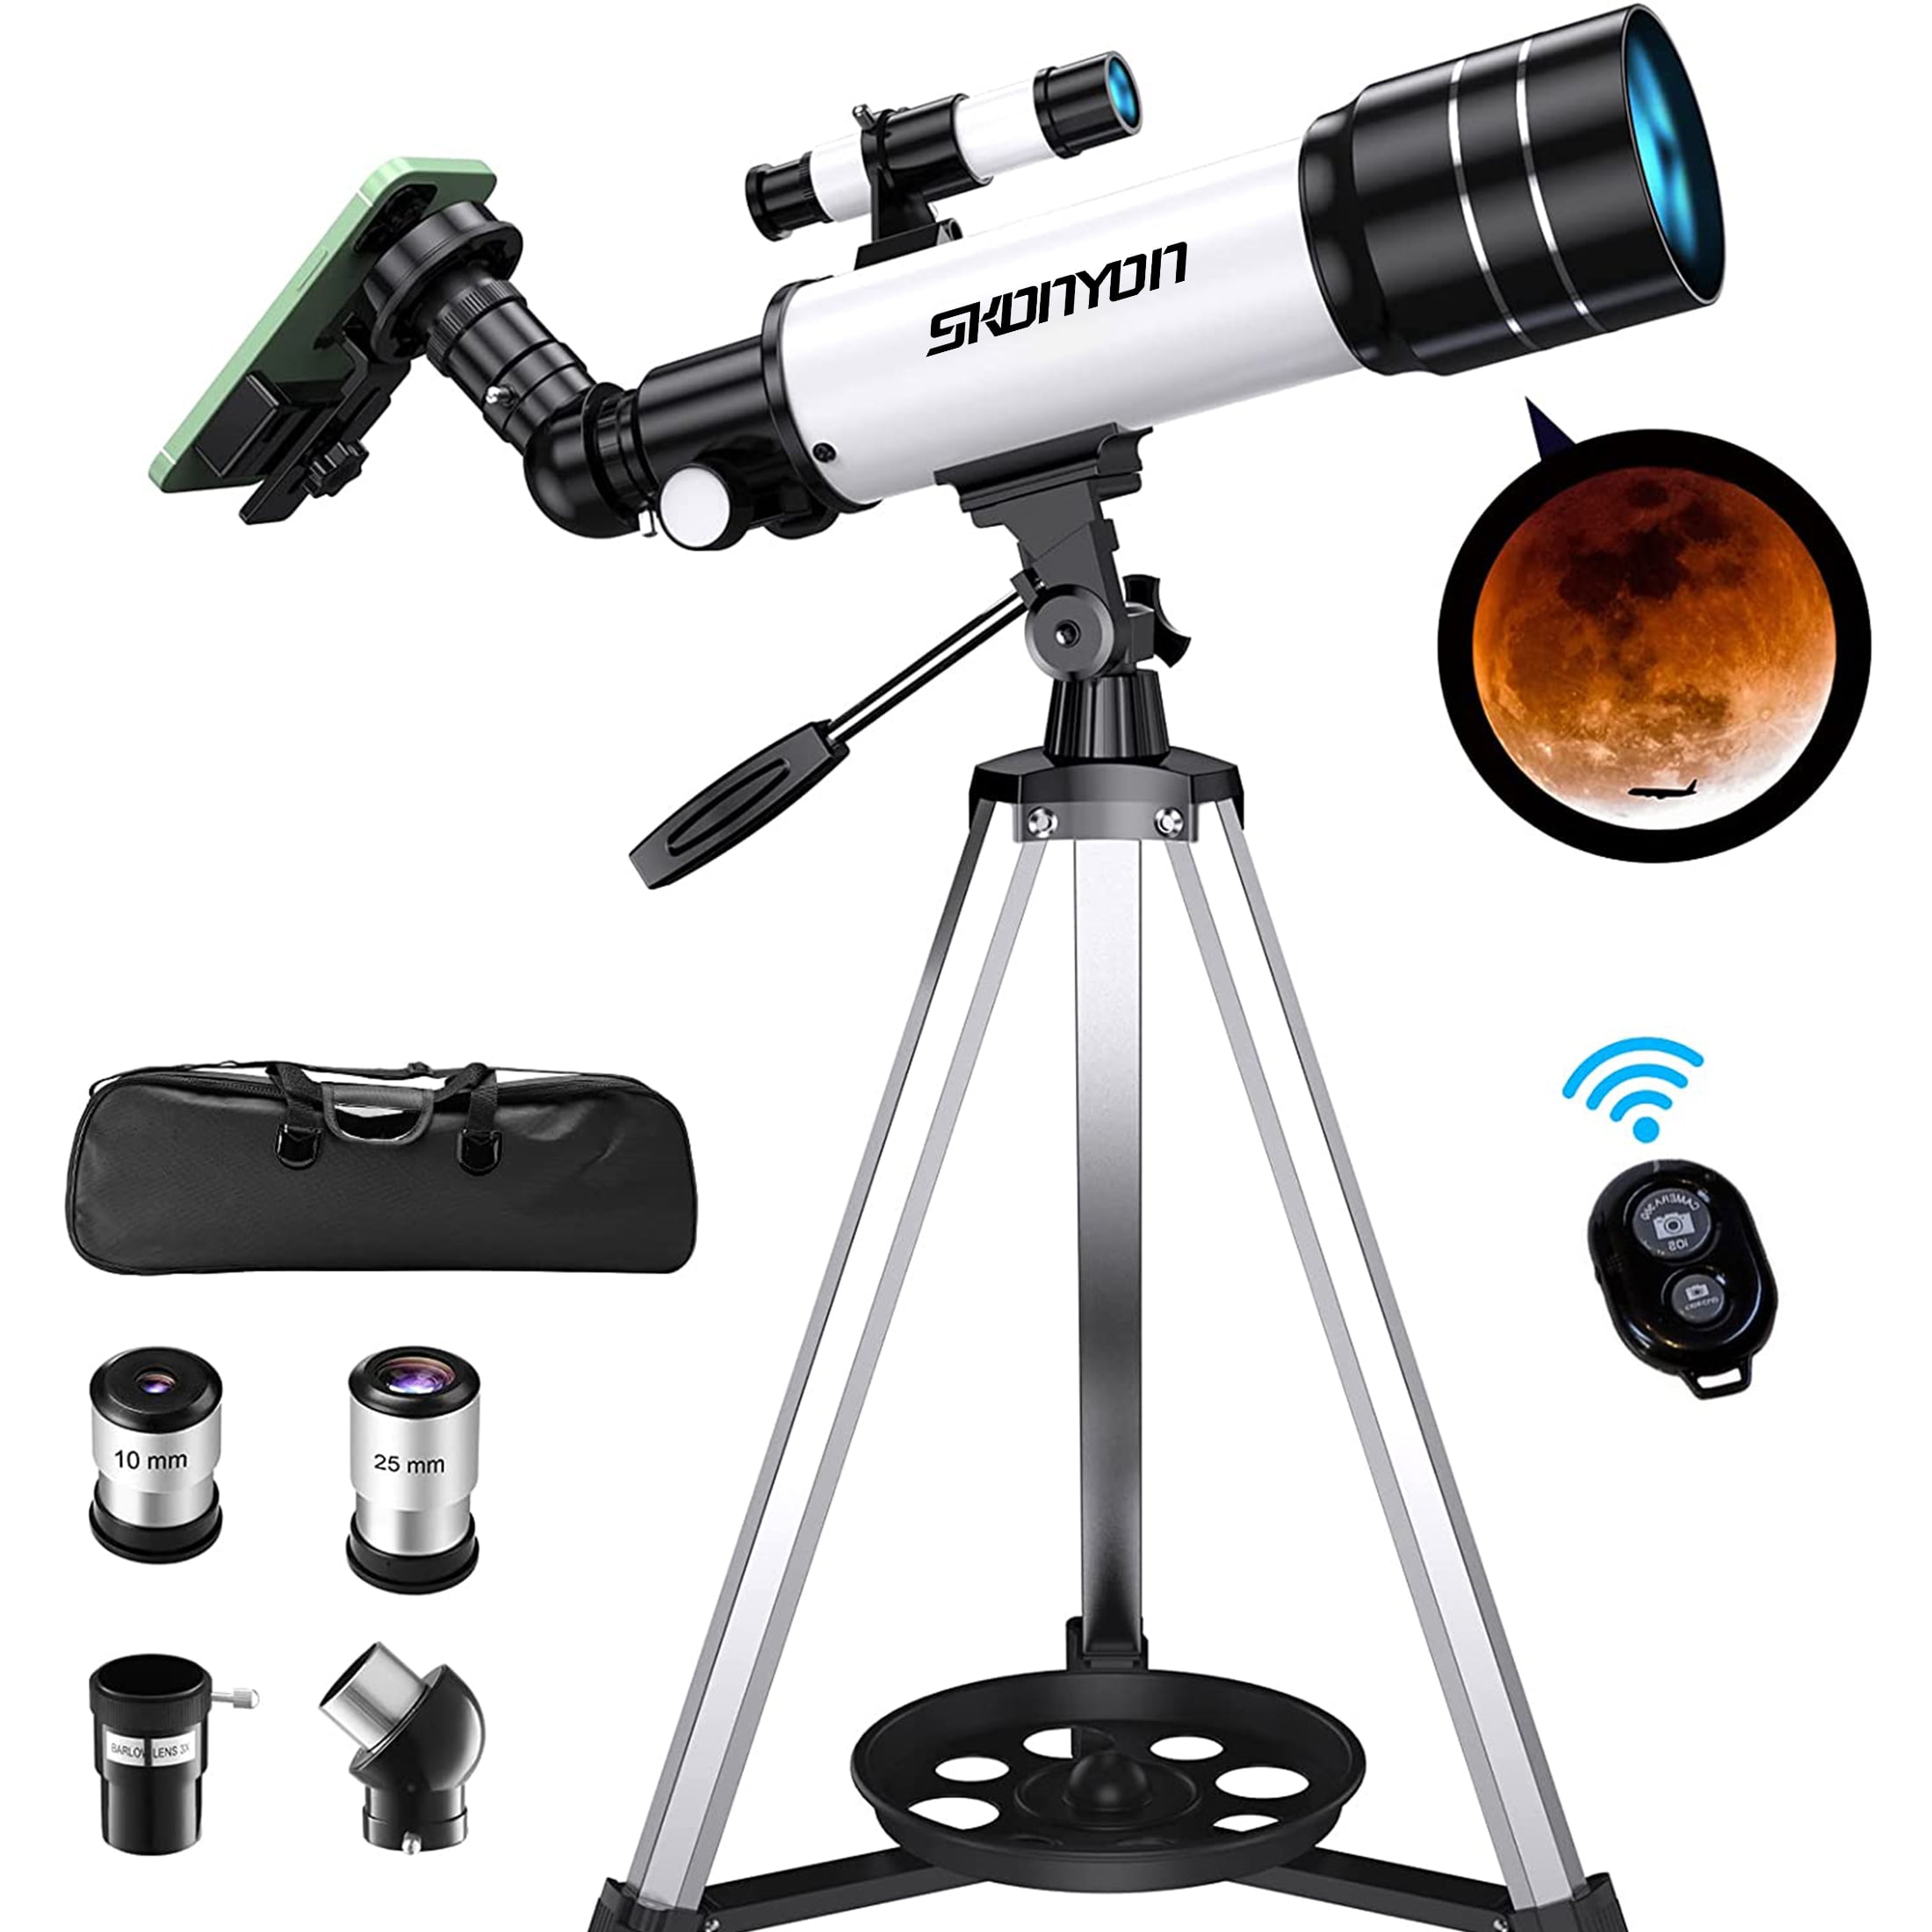 Travel Telescope with Phone Adapter Carry Bag 70mm Aperture 400mm Astronomical Refracting Portable Telescope LUXUN Telescope for Astronomy Beginners Kids Adults 